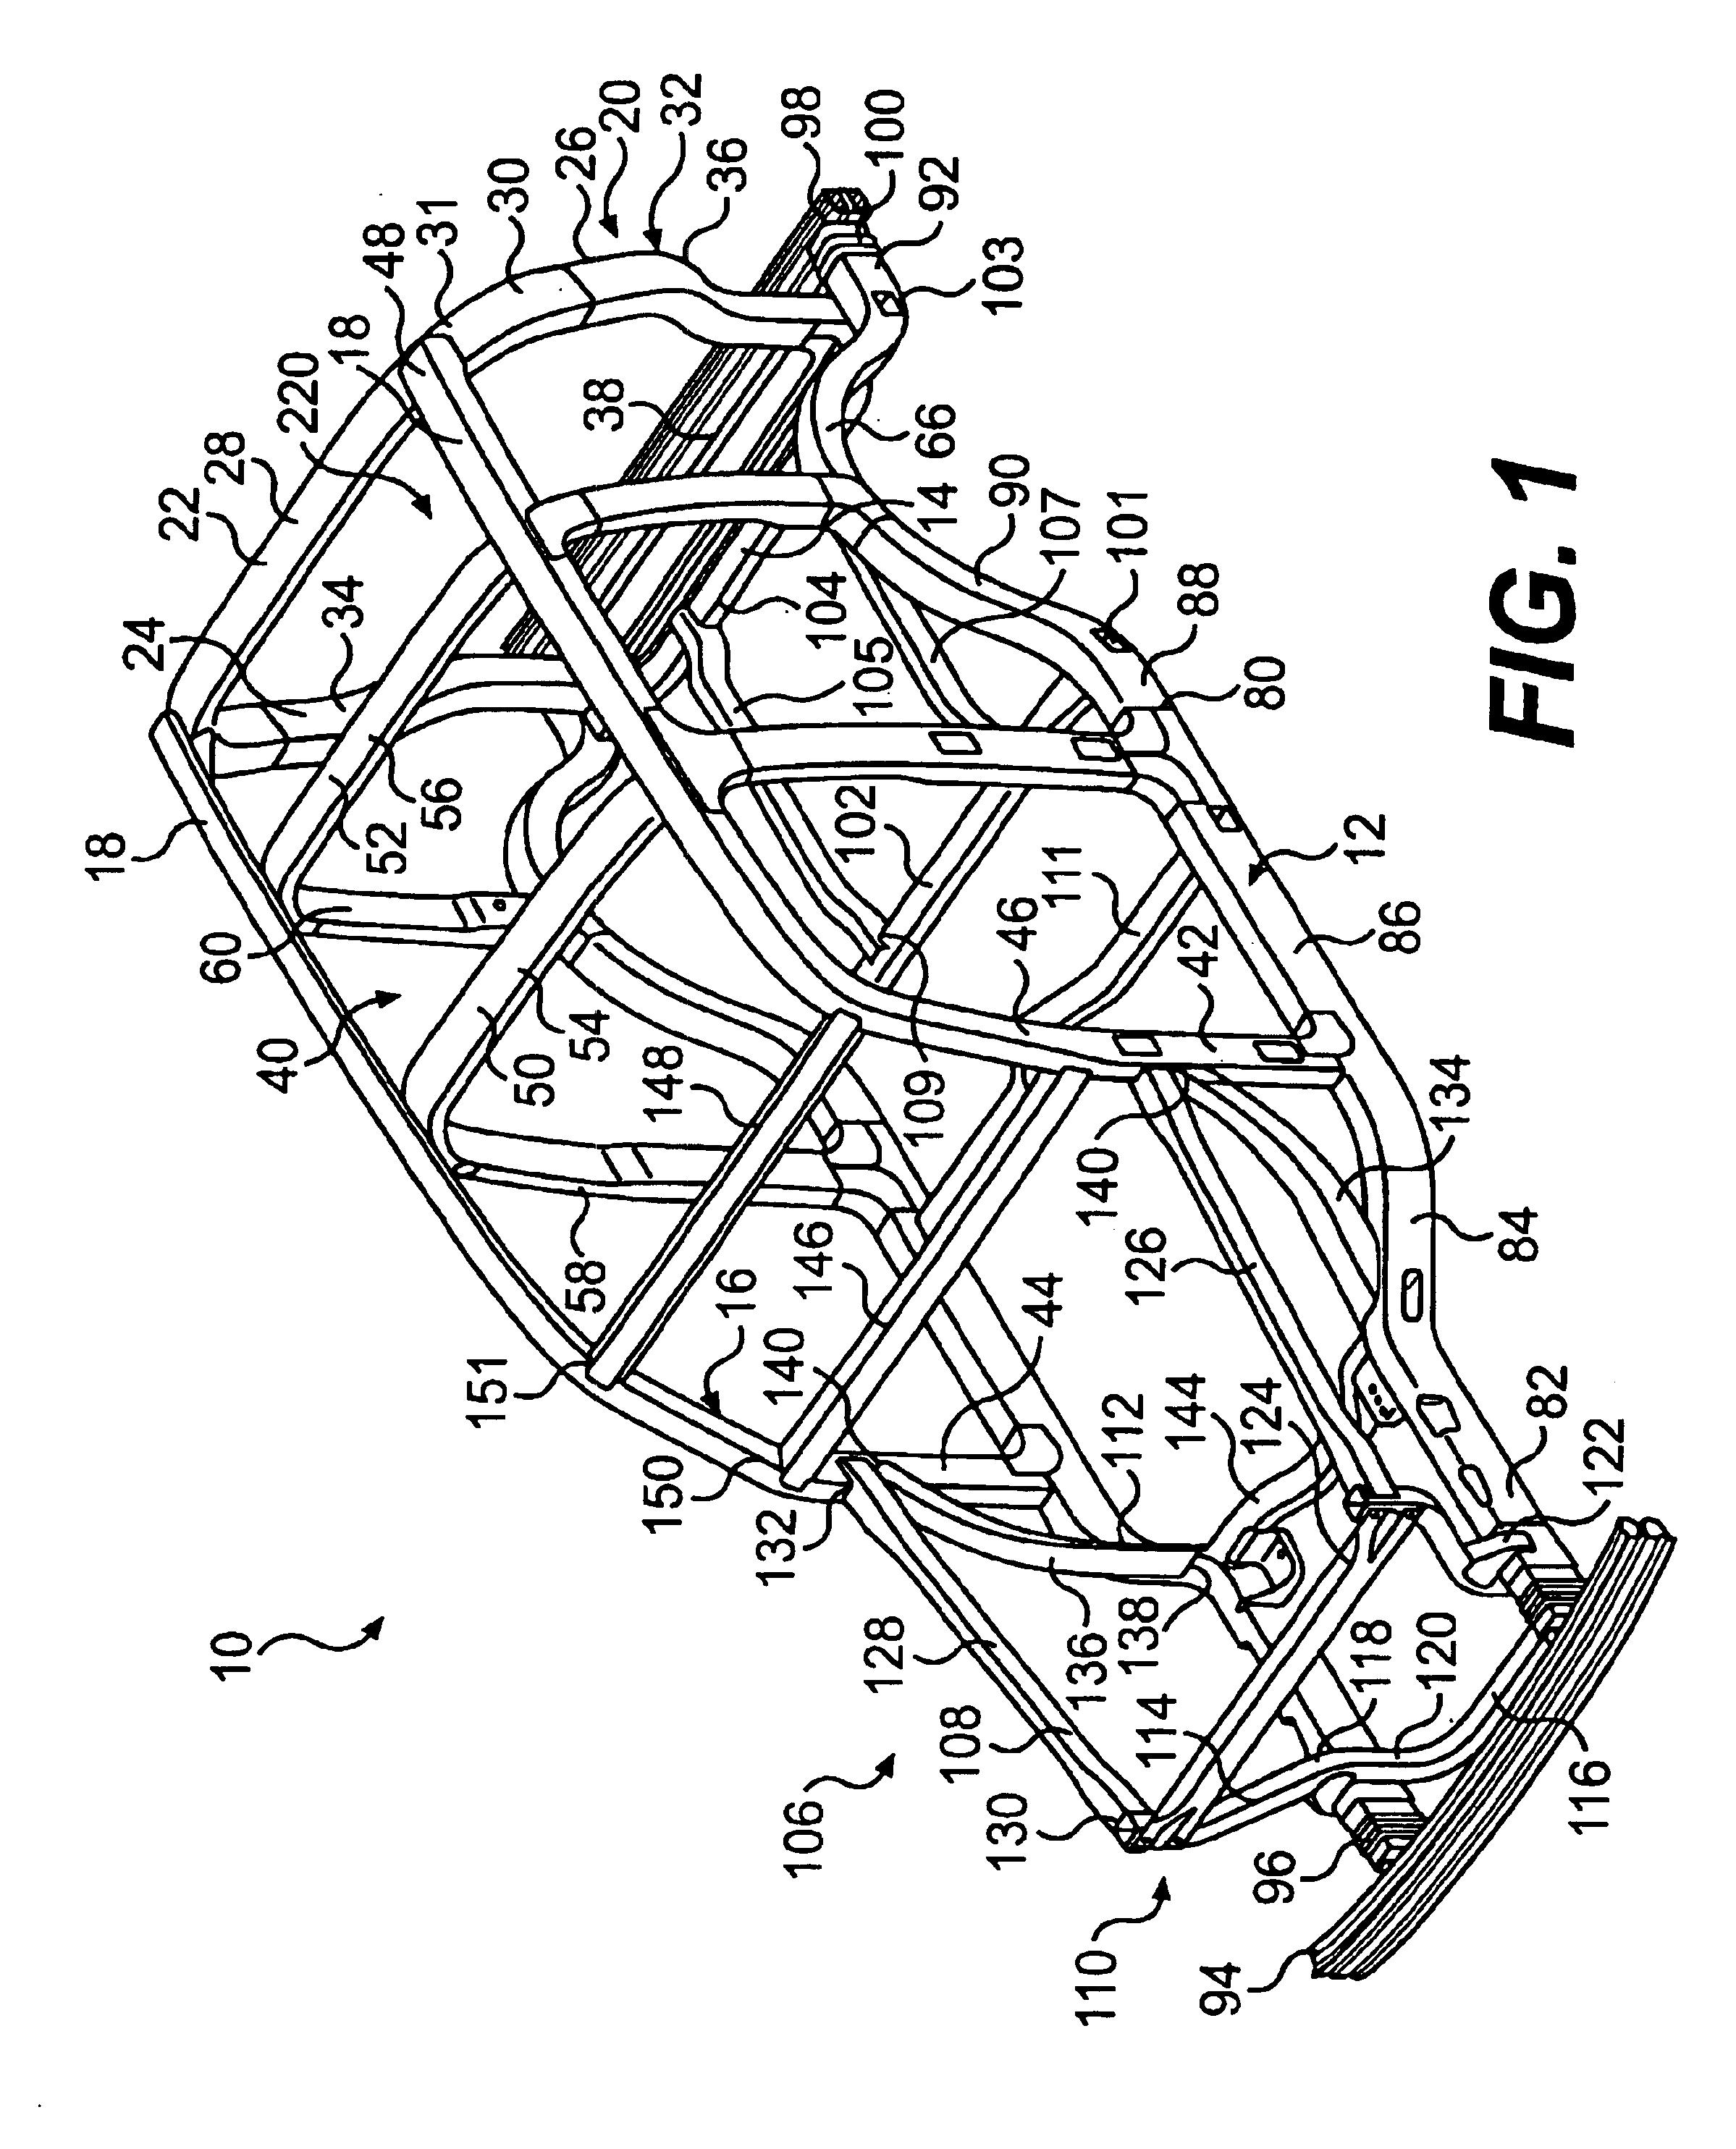 Hydroformed space frame and rearward ring assembly therefor